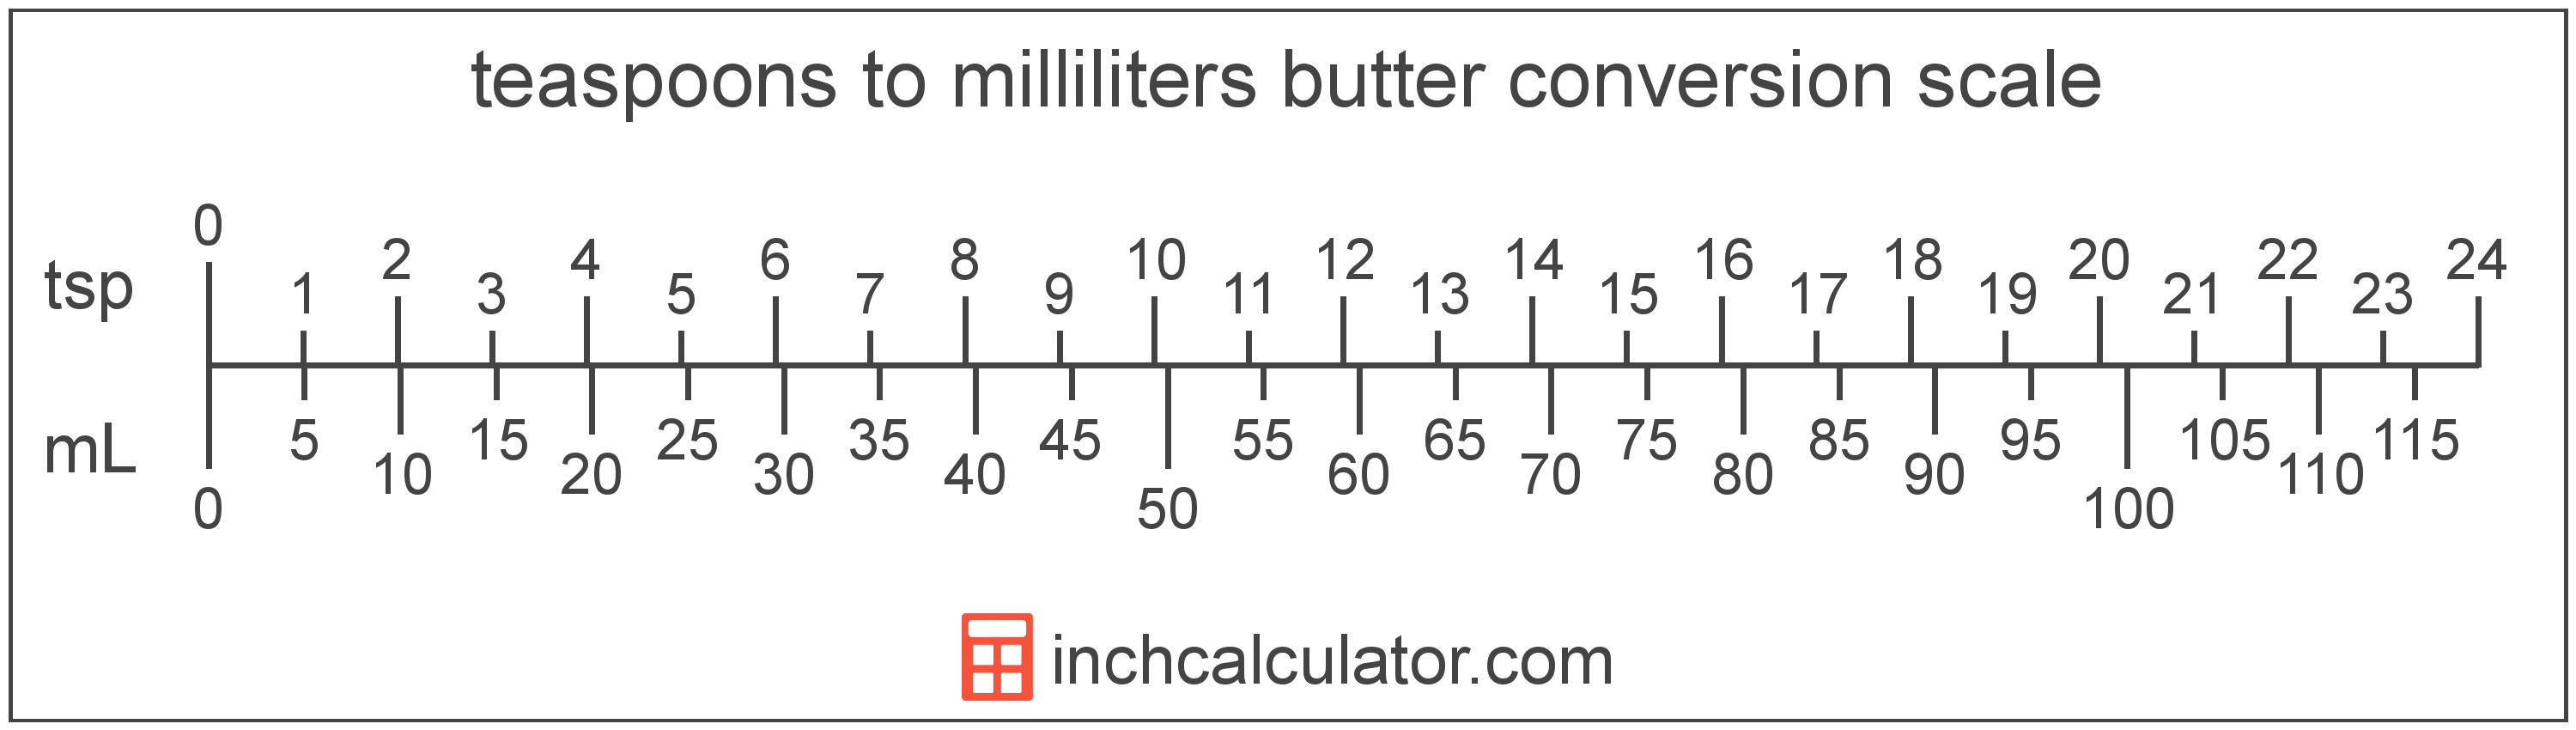 conversion scale showing teaspoons and equivalent milliliters butter values